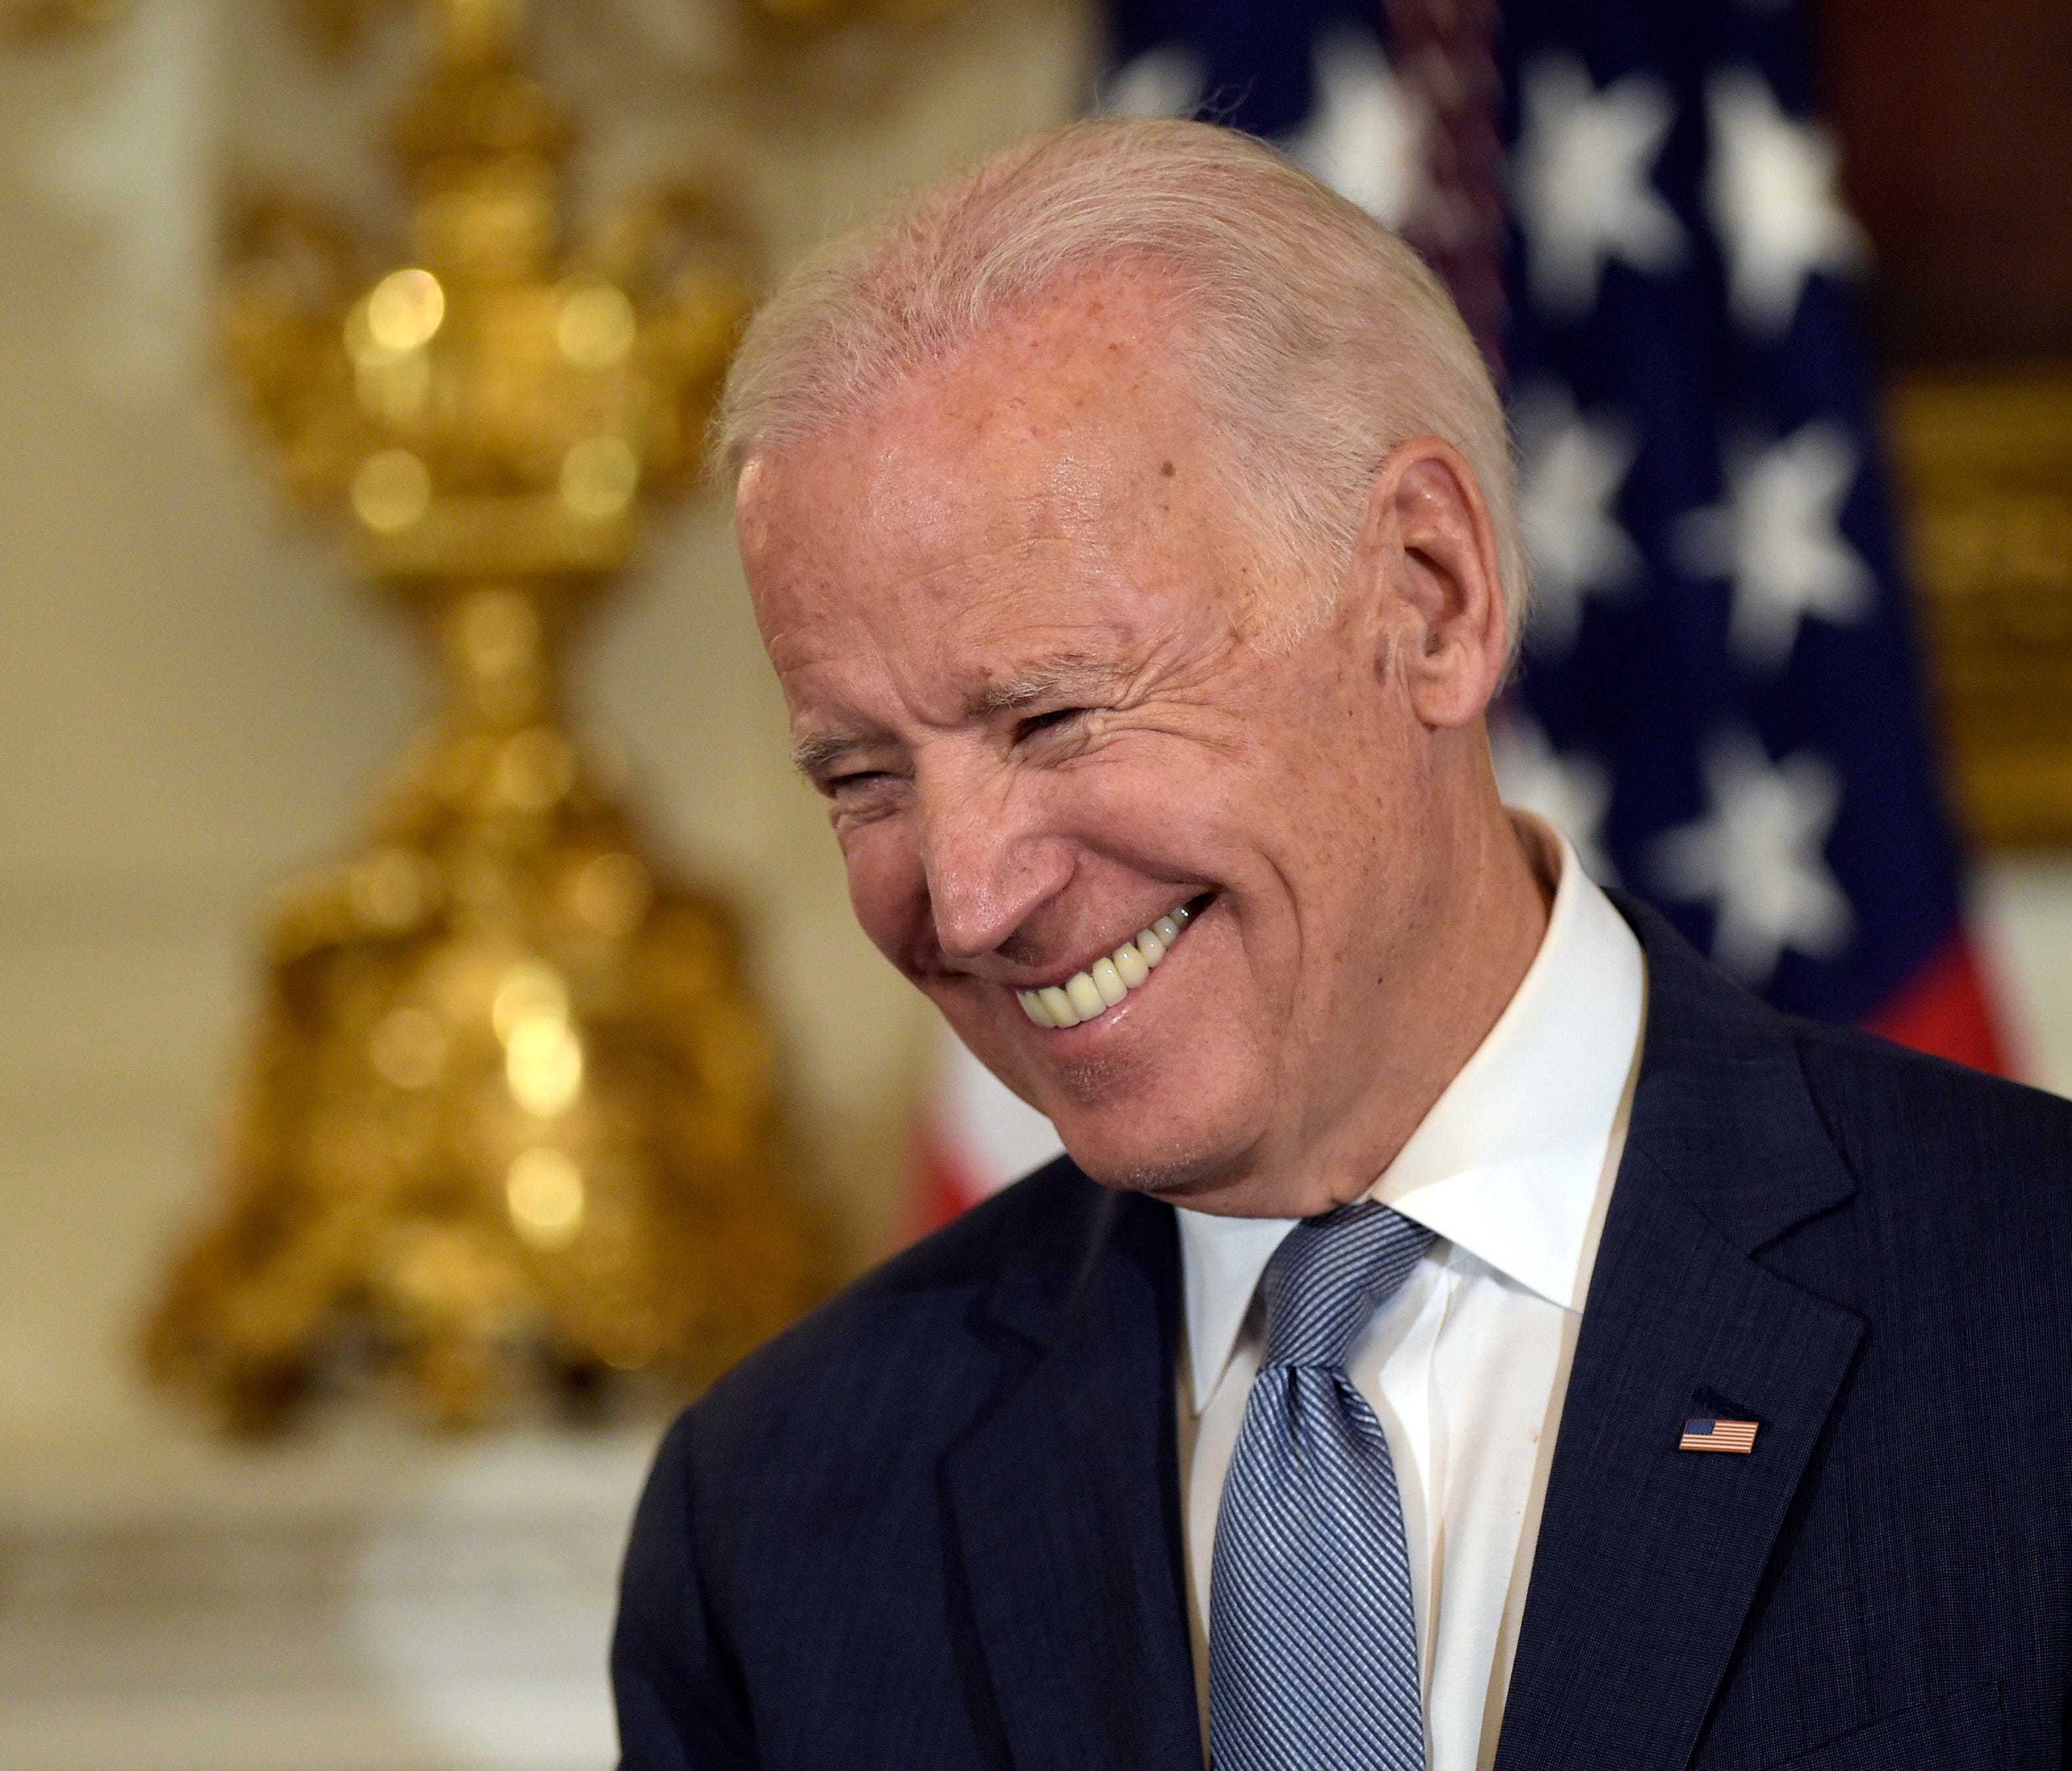 Vice President Joe Biden smiles during a ceremony in the State Dining Room.